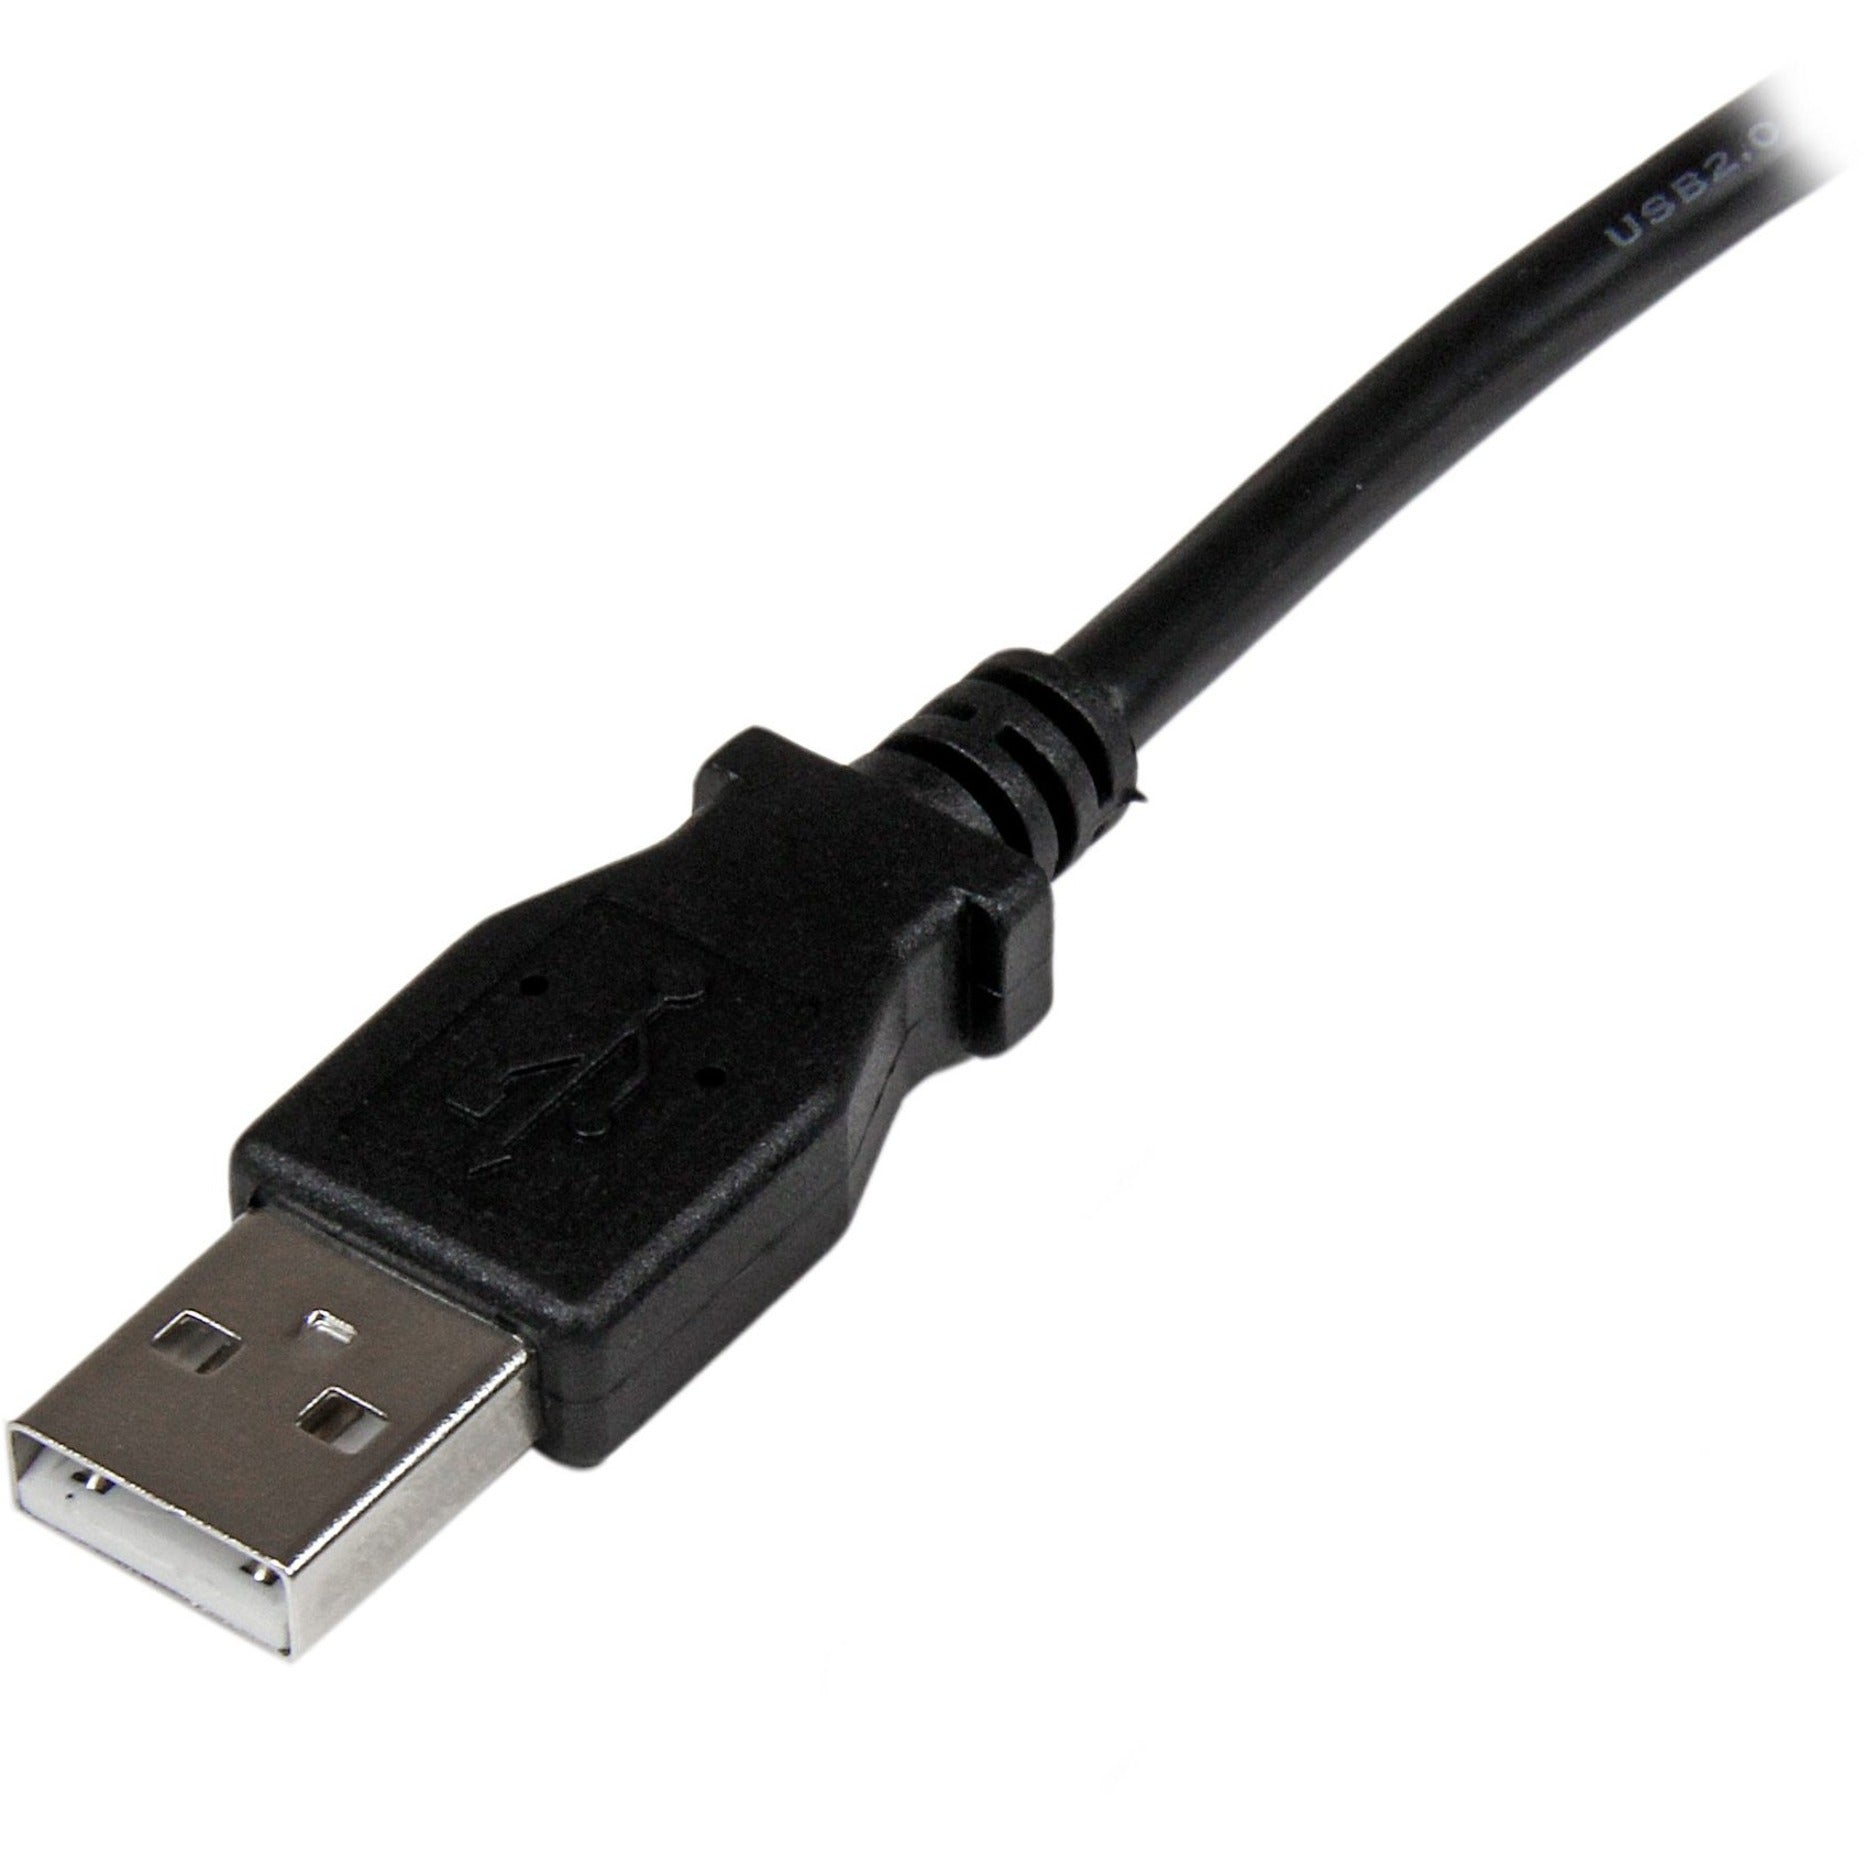 StarTech.com USBAB3MR 3m USB 2.0 A to Right Angle B Cable - M/M, 9.84 ft Data Transfer Cable